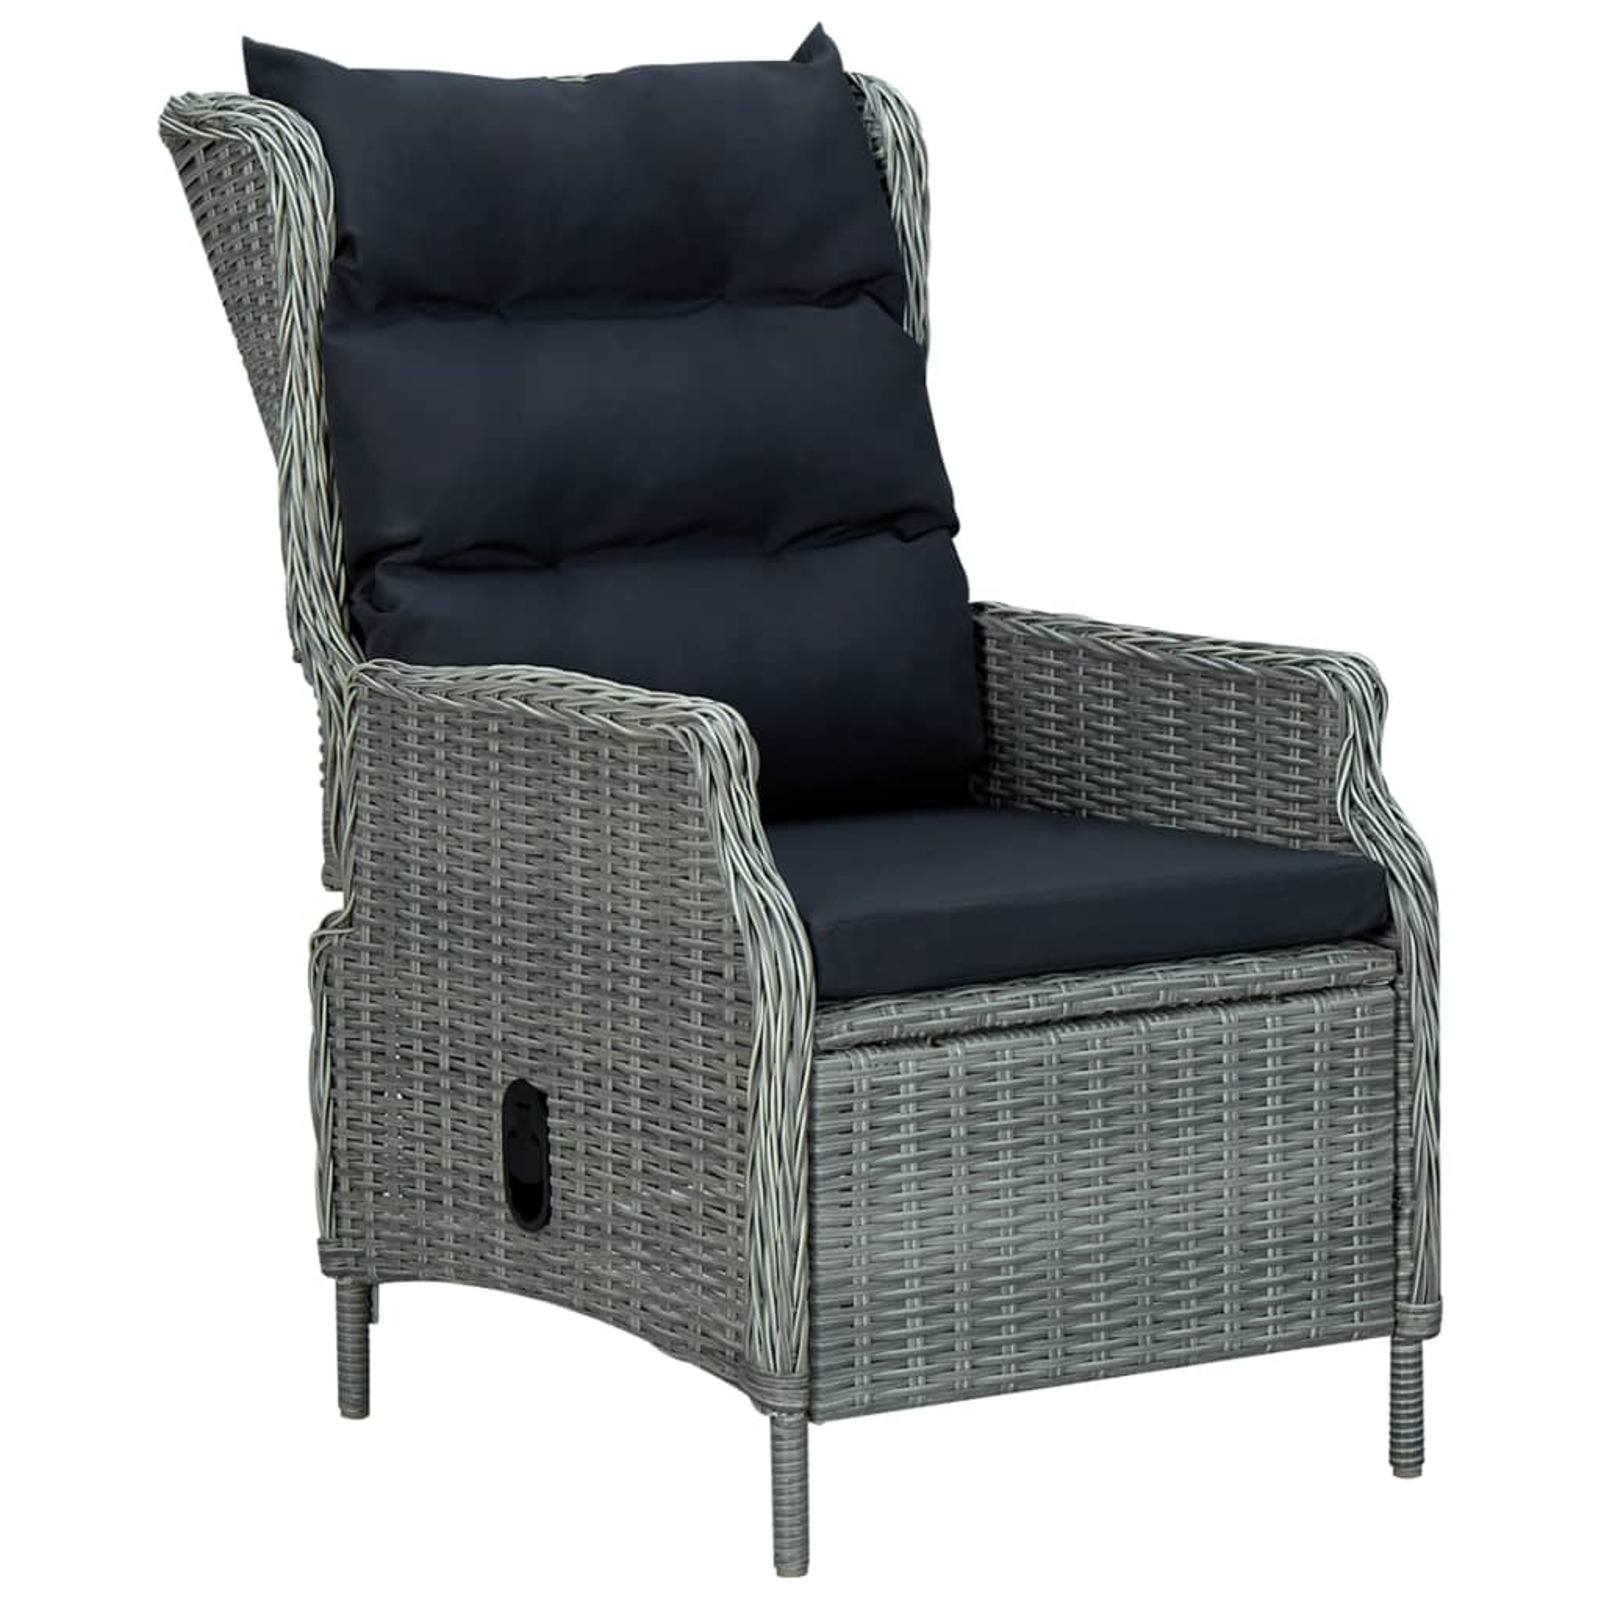 Suzicca Reclining Patio Chair with Cushions Poly Rattan Gray - image 1 of 7